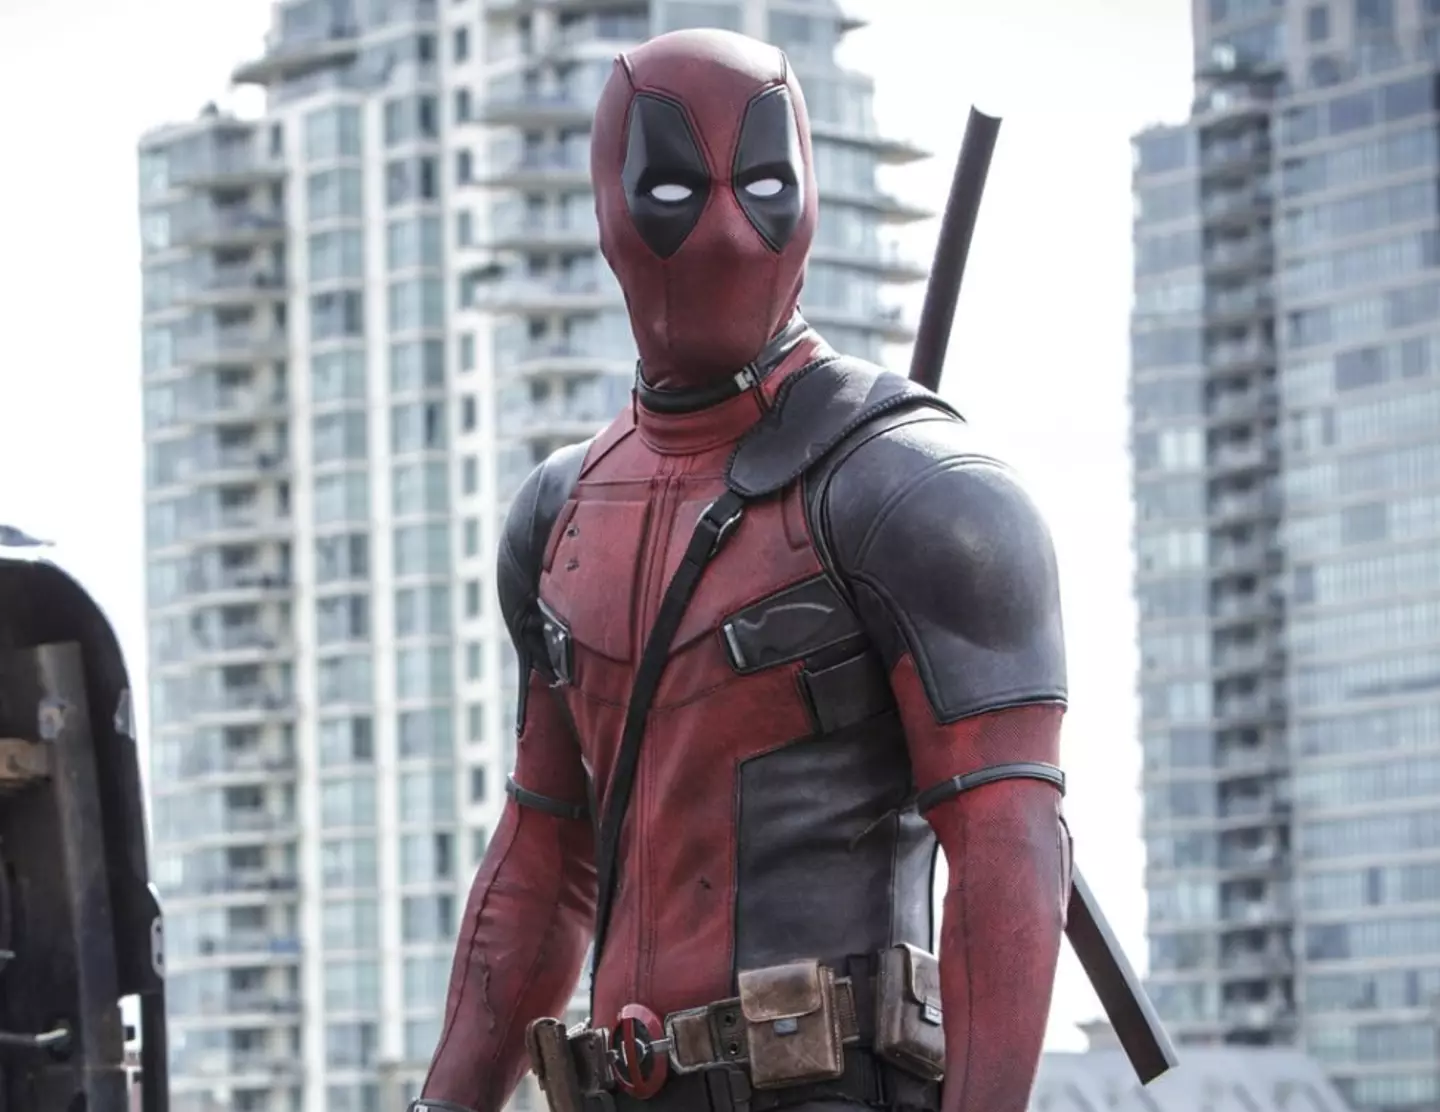 Ryan Reynolds had to spend a lot of time in a suit for Deadpool.